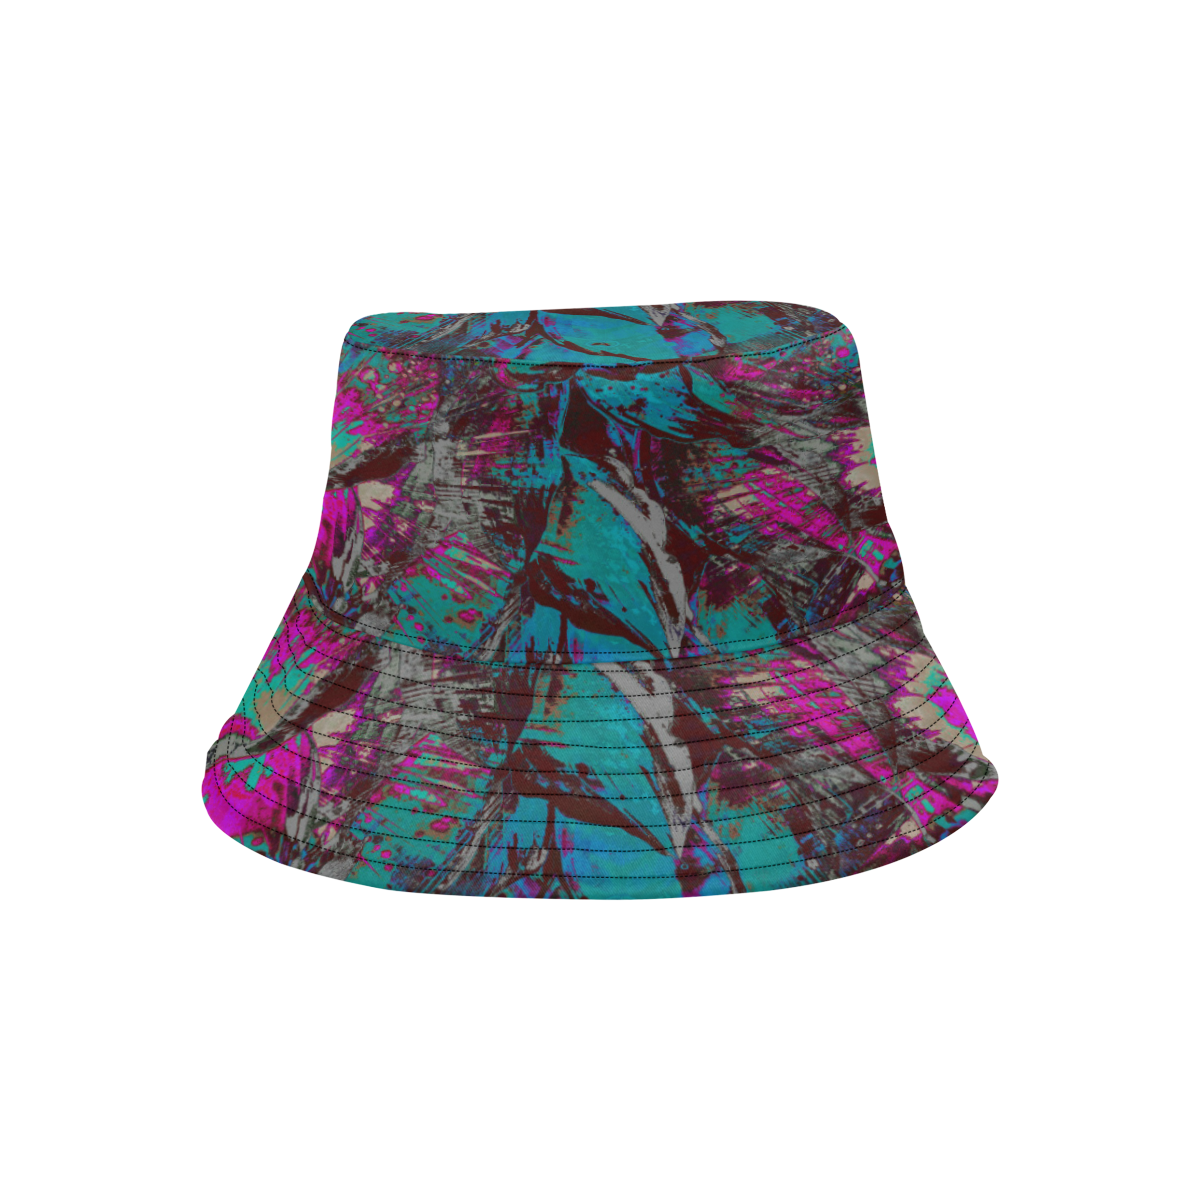 wheelVibe2_8500 44 low All Over Print Bucket Hat for Men